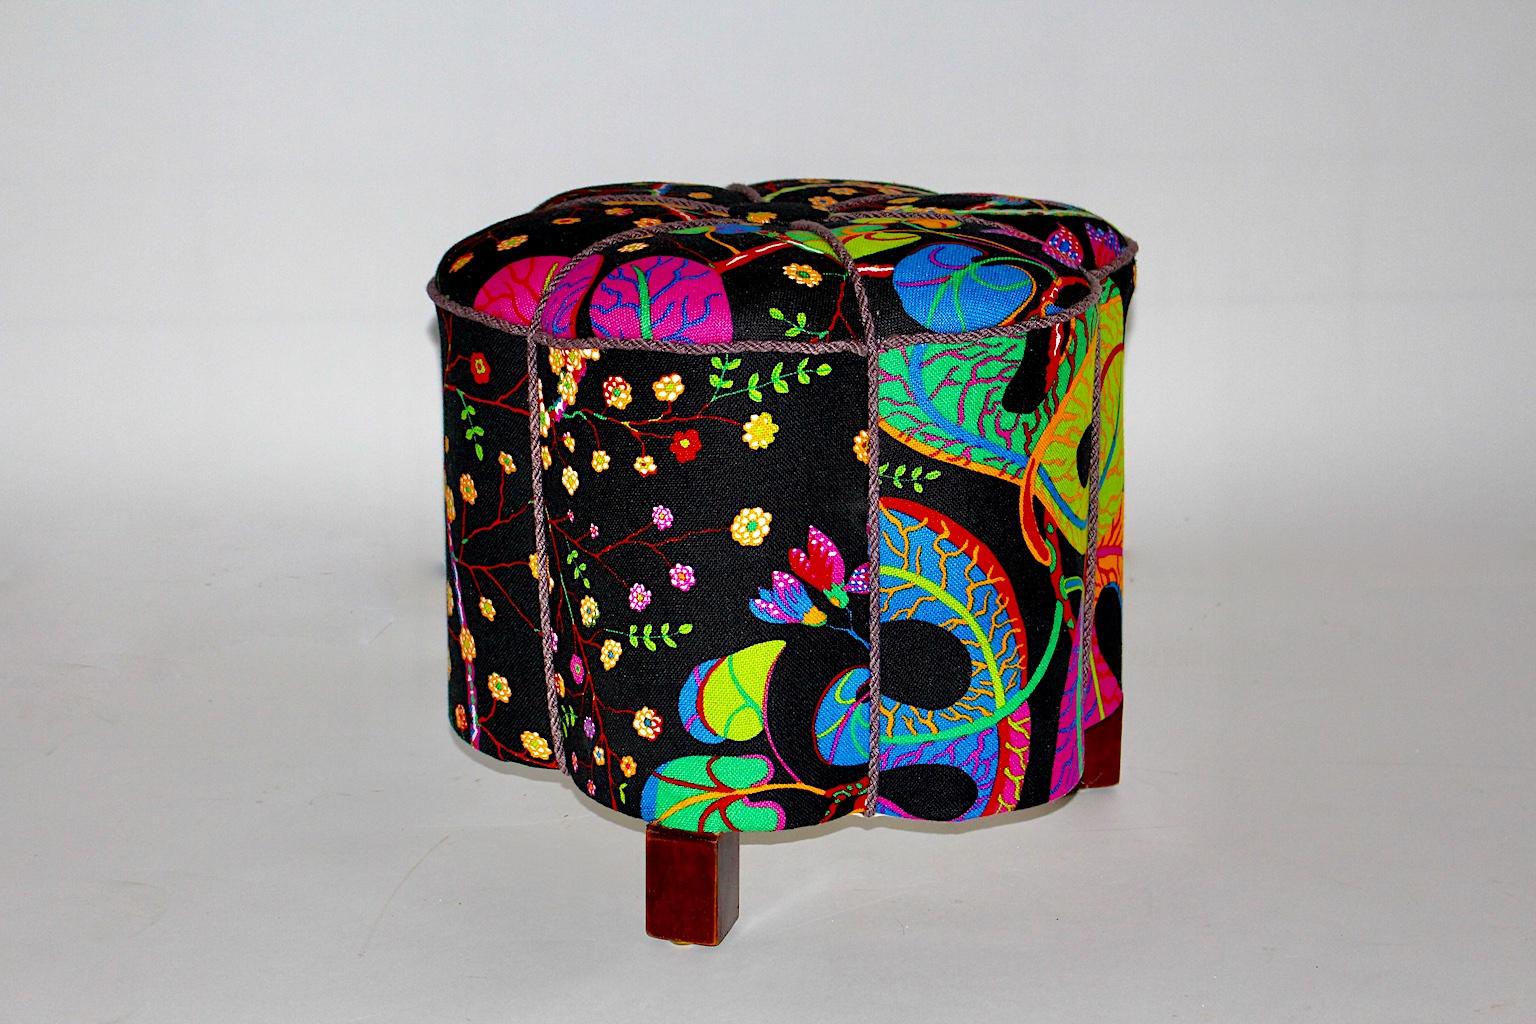 Upholstery Art Deco Vintage Multicolored Fabric Stool or Pouf, Austria, 1930s For Sale